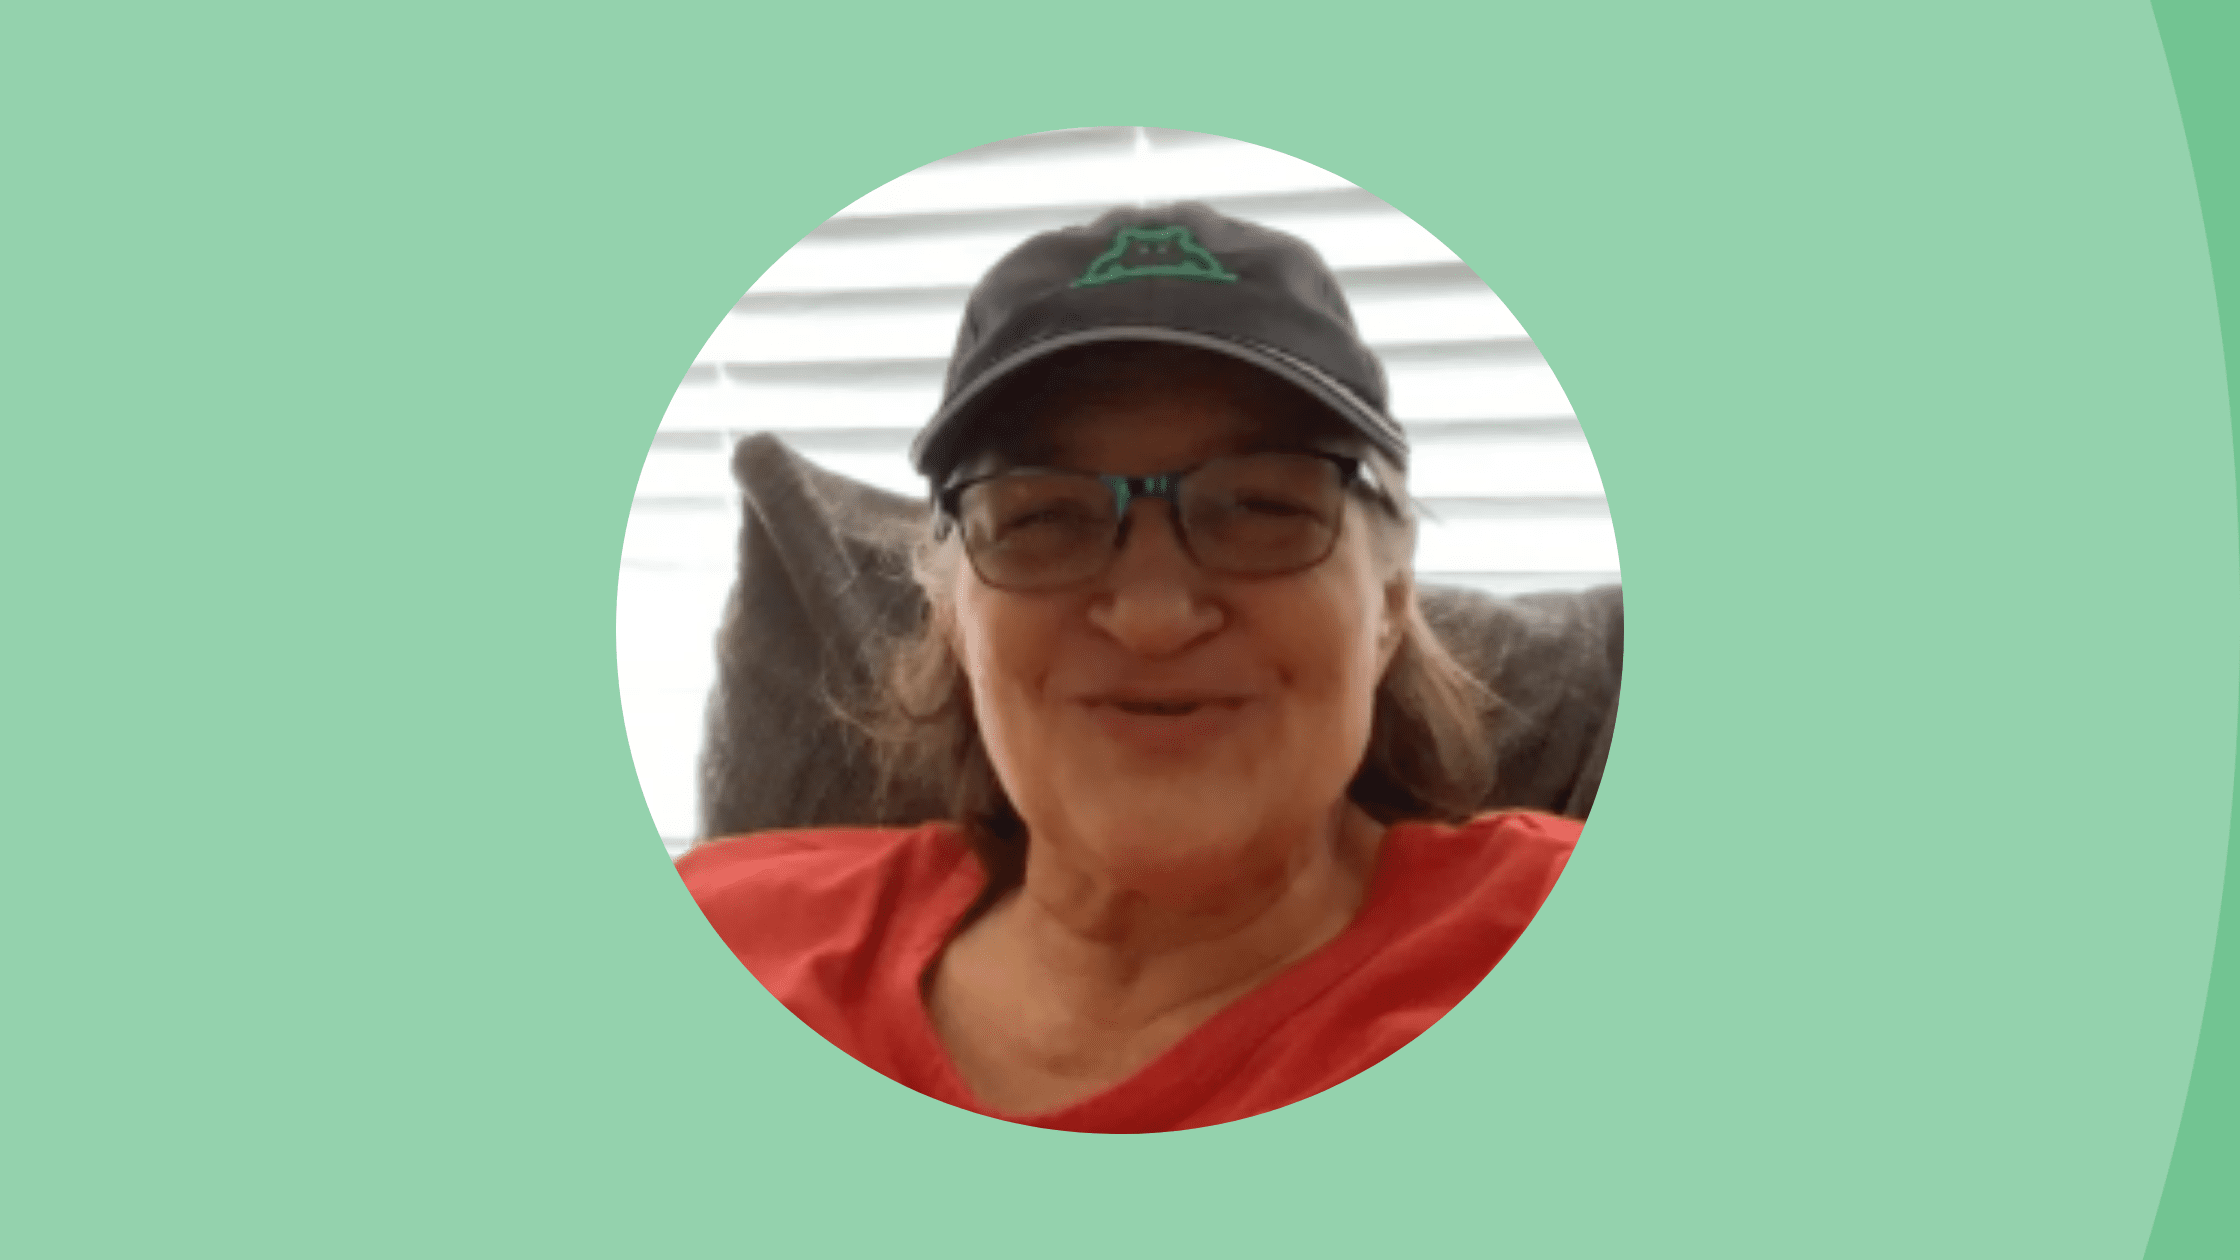 Debra is off blood pressure and depression medication, less stressed, and burned 14 pounds through gut-health